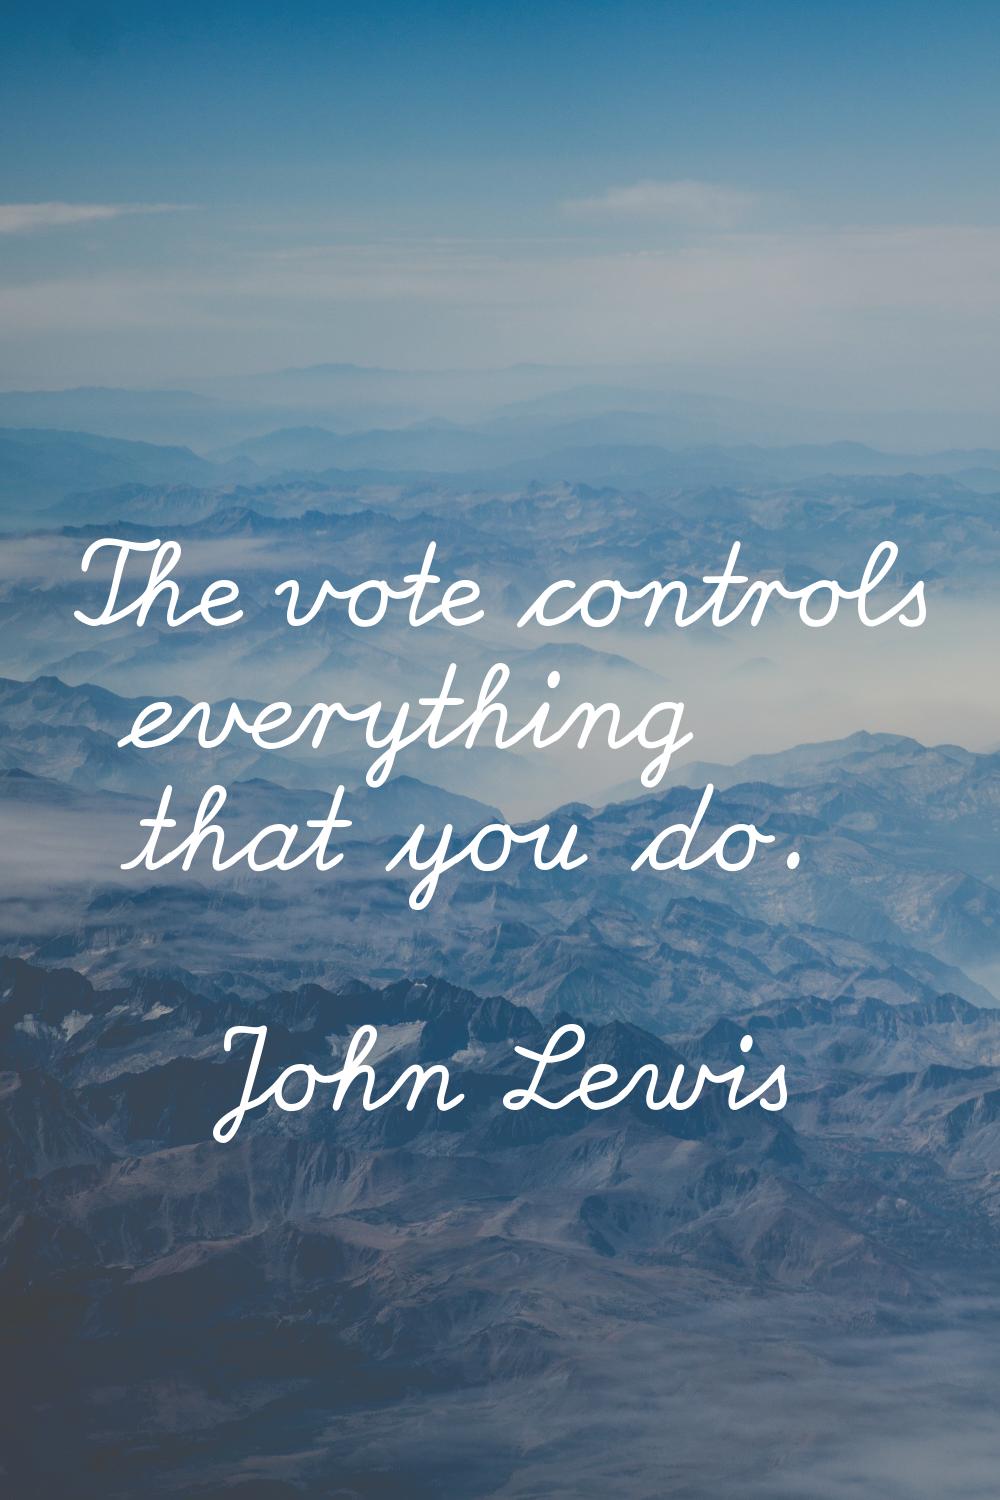 The vote controls everything that you do.